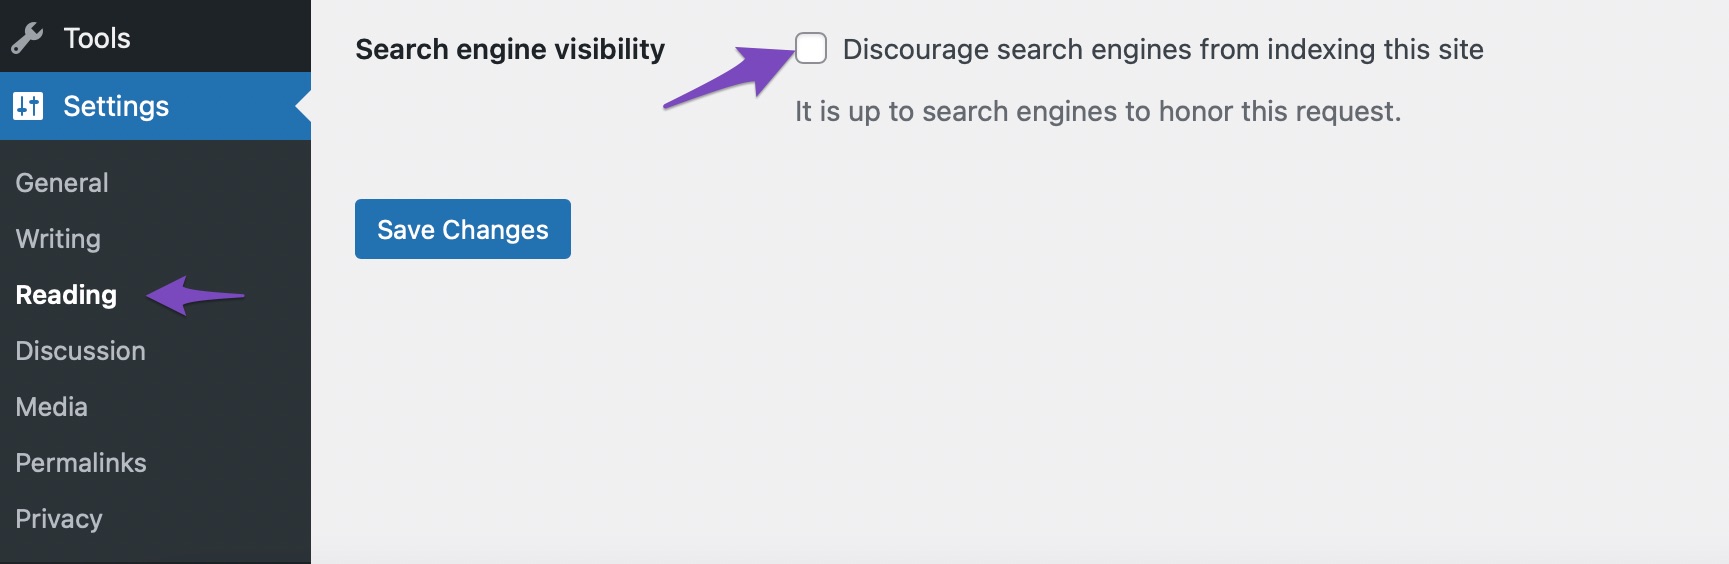 search engine visibility in wordpress